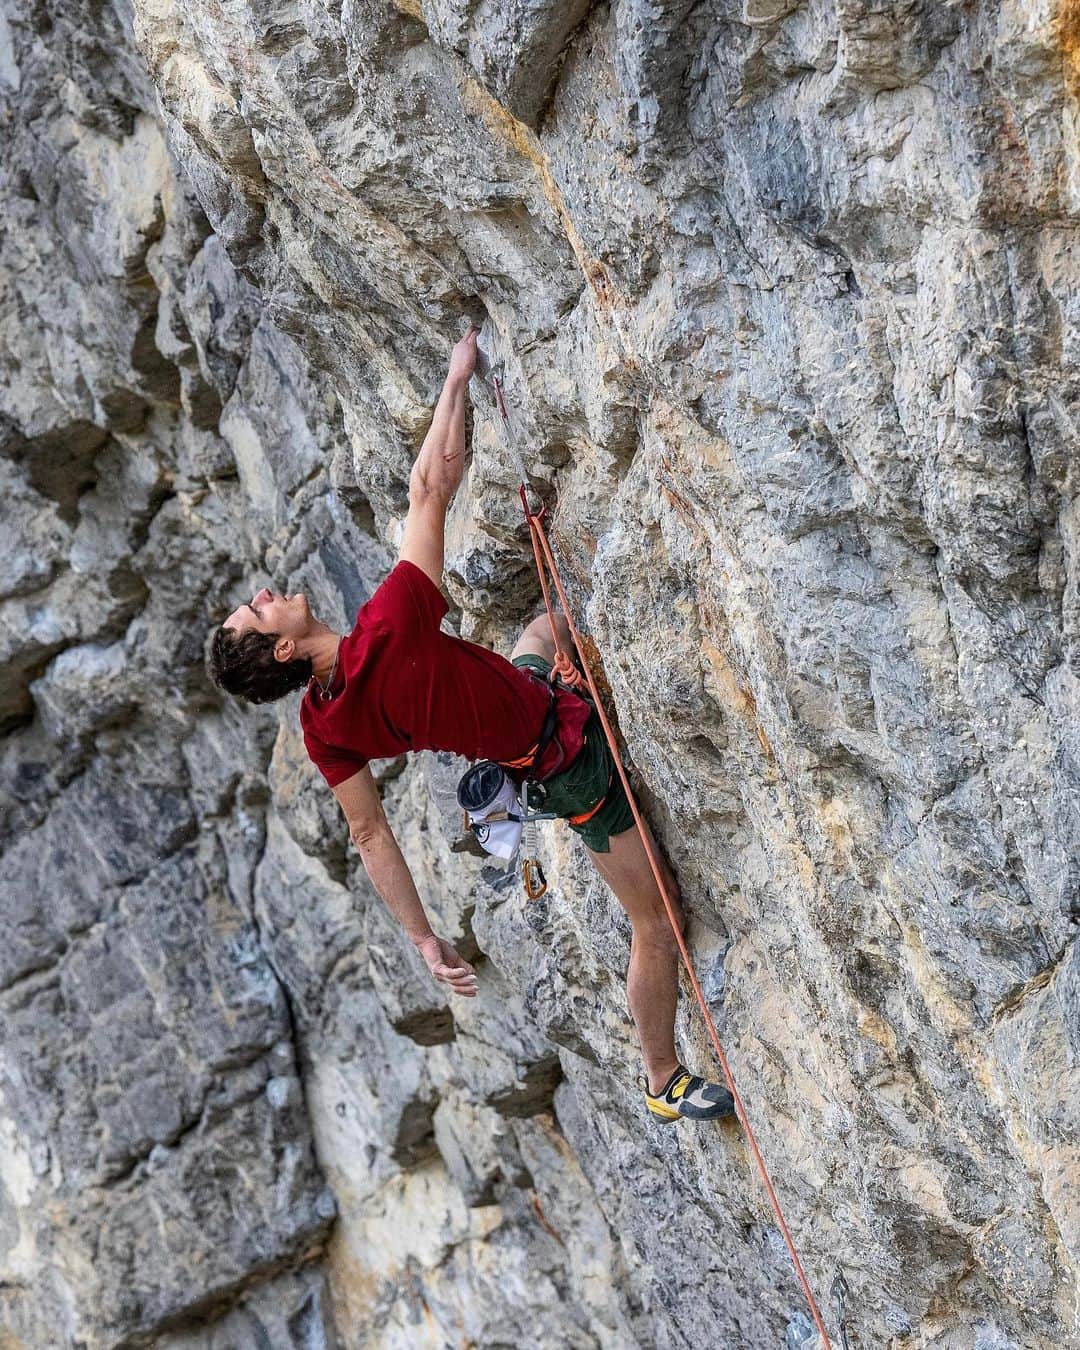 Mammutのインスタグラム：「Unseen footage from @adam.ondra ‘s visit in Switzerland 🎞️  Product testing & feedback sessions, various outdoor climbing destinations - challenging weather conditions didn’t stop Adam from sending some demanding routes 💪🏼 Check out our previous post to see which routes were completed during the visit ✅  YouTube episode from the visit coming soon on Adam’s YouTube channel, stay tuned!  Picture by @janvogl_kameruje (9a+ first ascent in Isenfluh).  #adamondra #climbing #mammut」